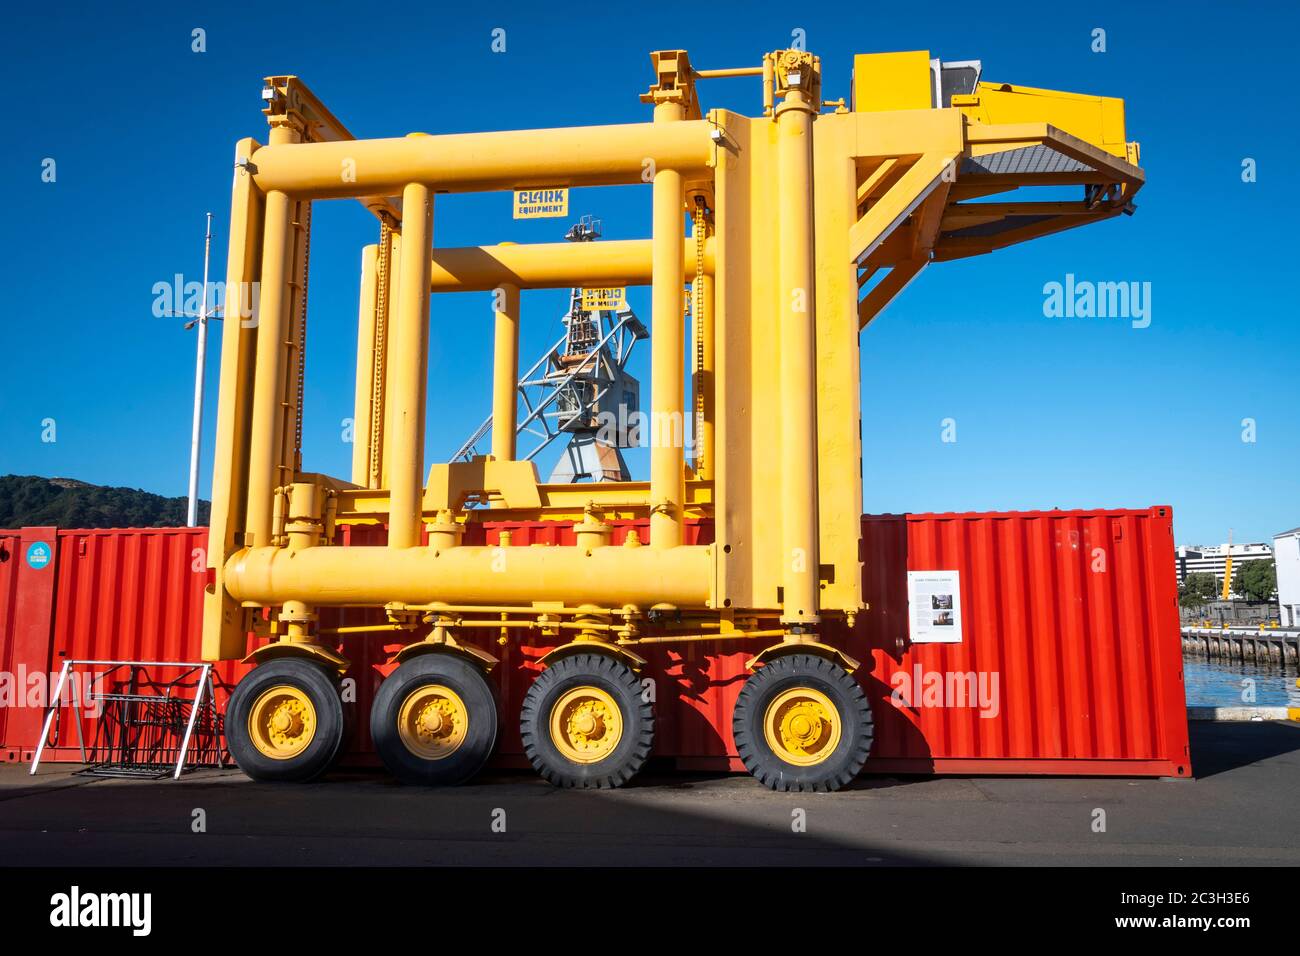 Straddle Container Carrier, Wellington Harbor, North Island, Neuseeland Stockfoto